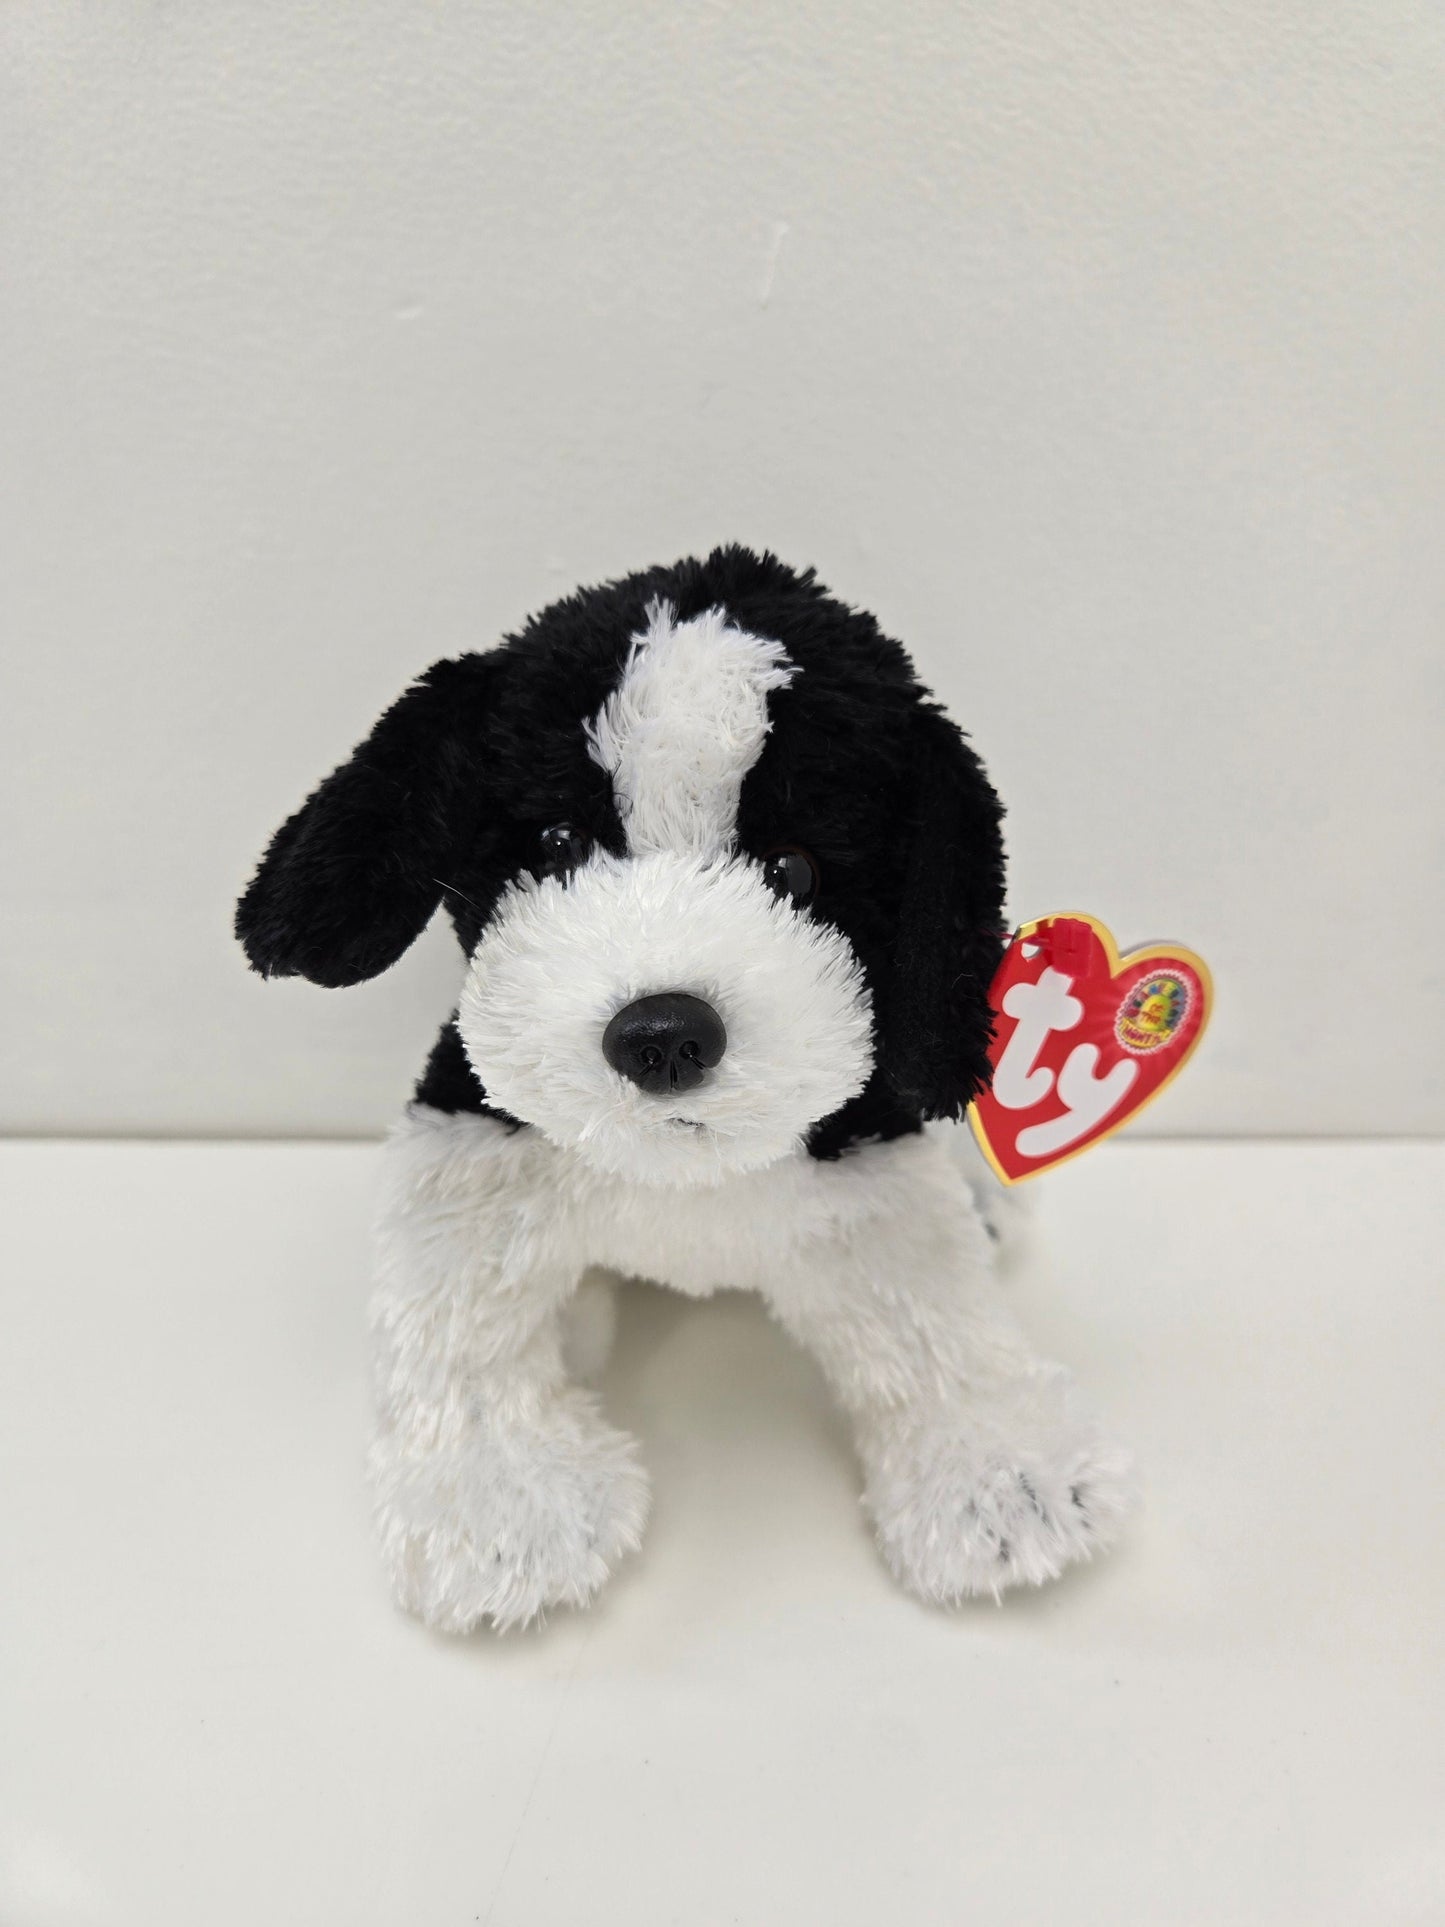 Ty Beanie Baby “Riggins” the Dog - Beanie Baby of the Month *Rare* (6 inch)